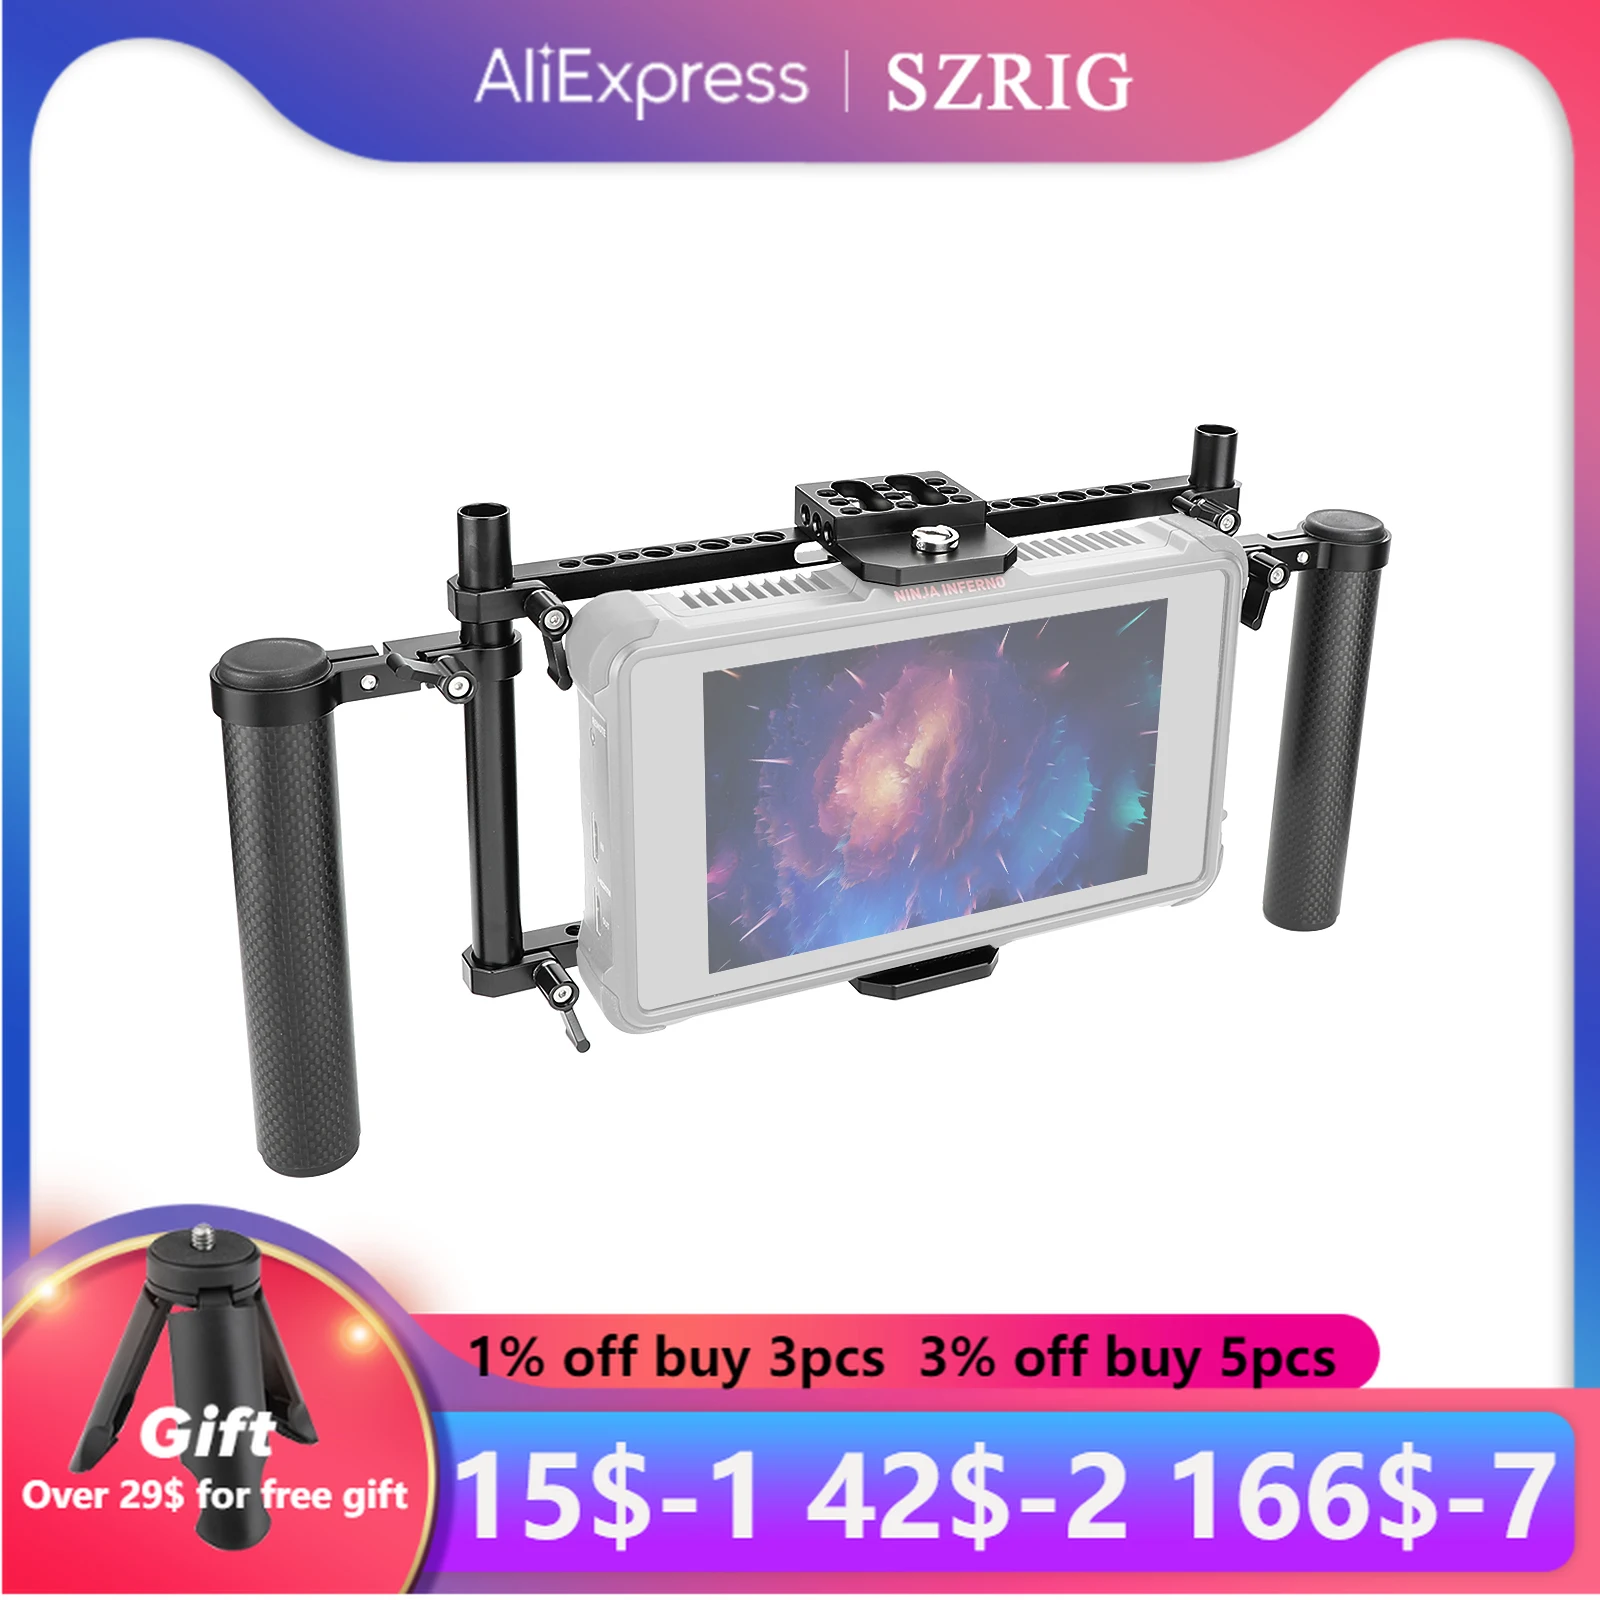 

SZRIG Director's Monitor 7" & 5" Cage Rig With Battery plate & Dual Carbon Fiber Handgrip for Universal Camera Monitors